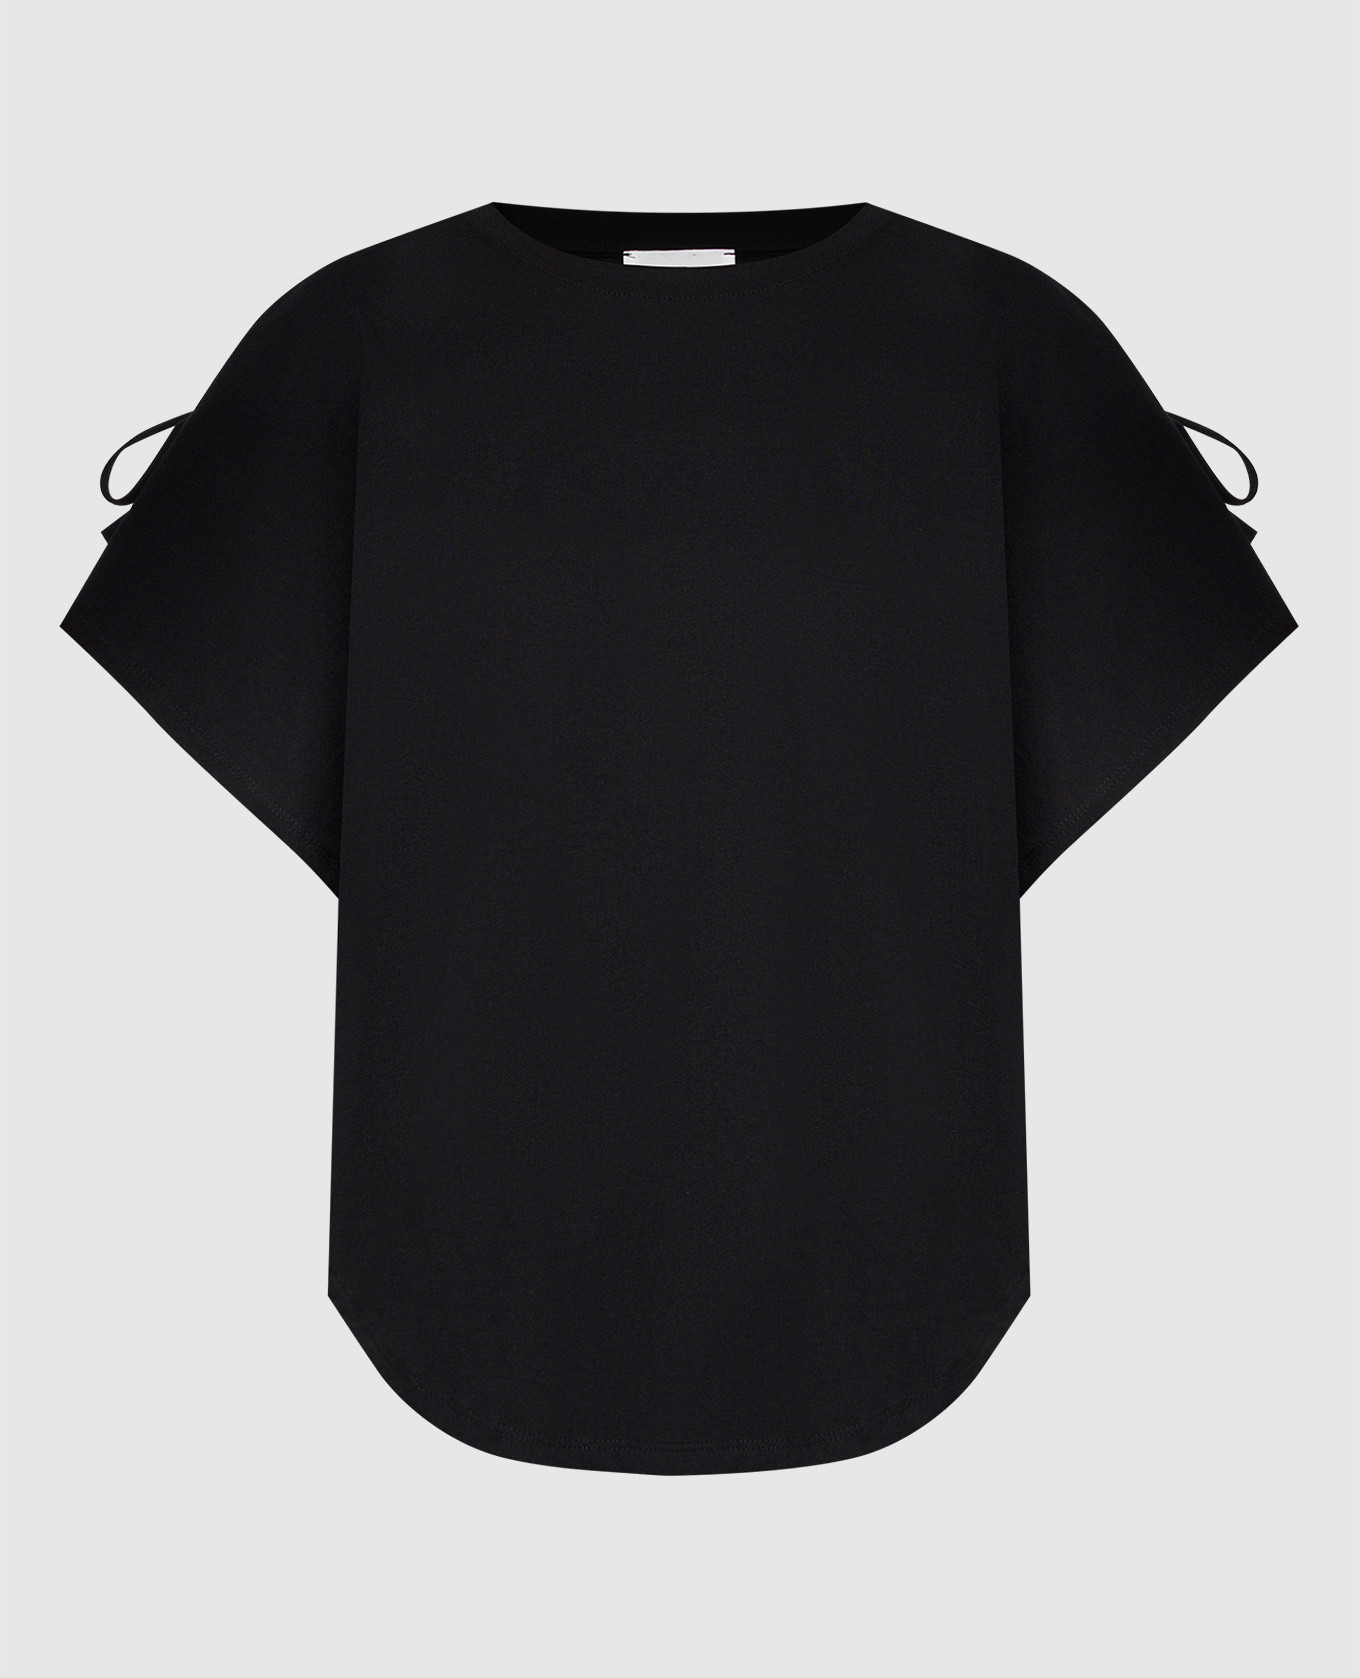 Black T-shirt with ties